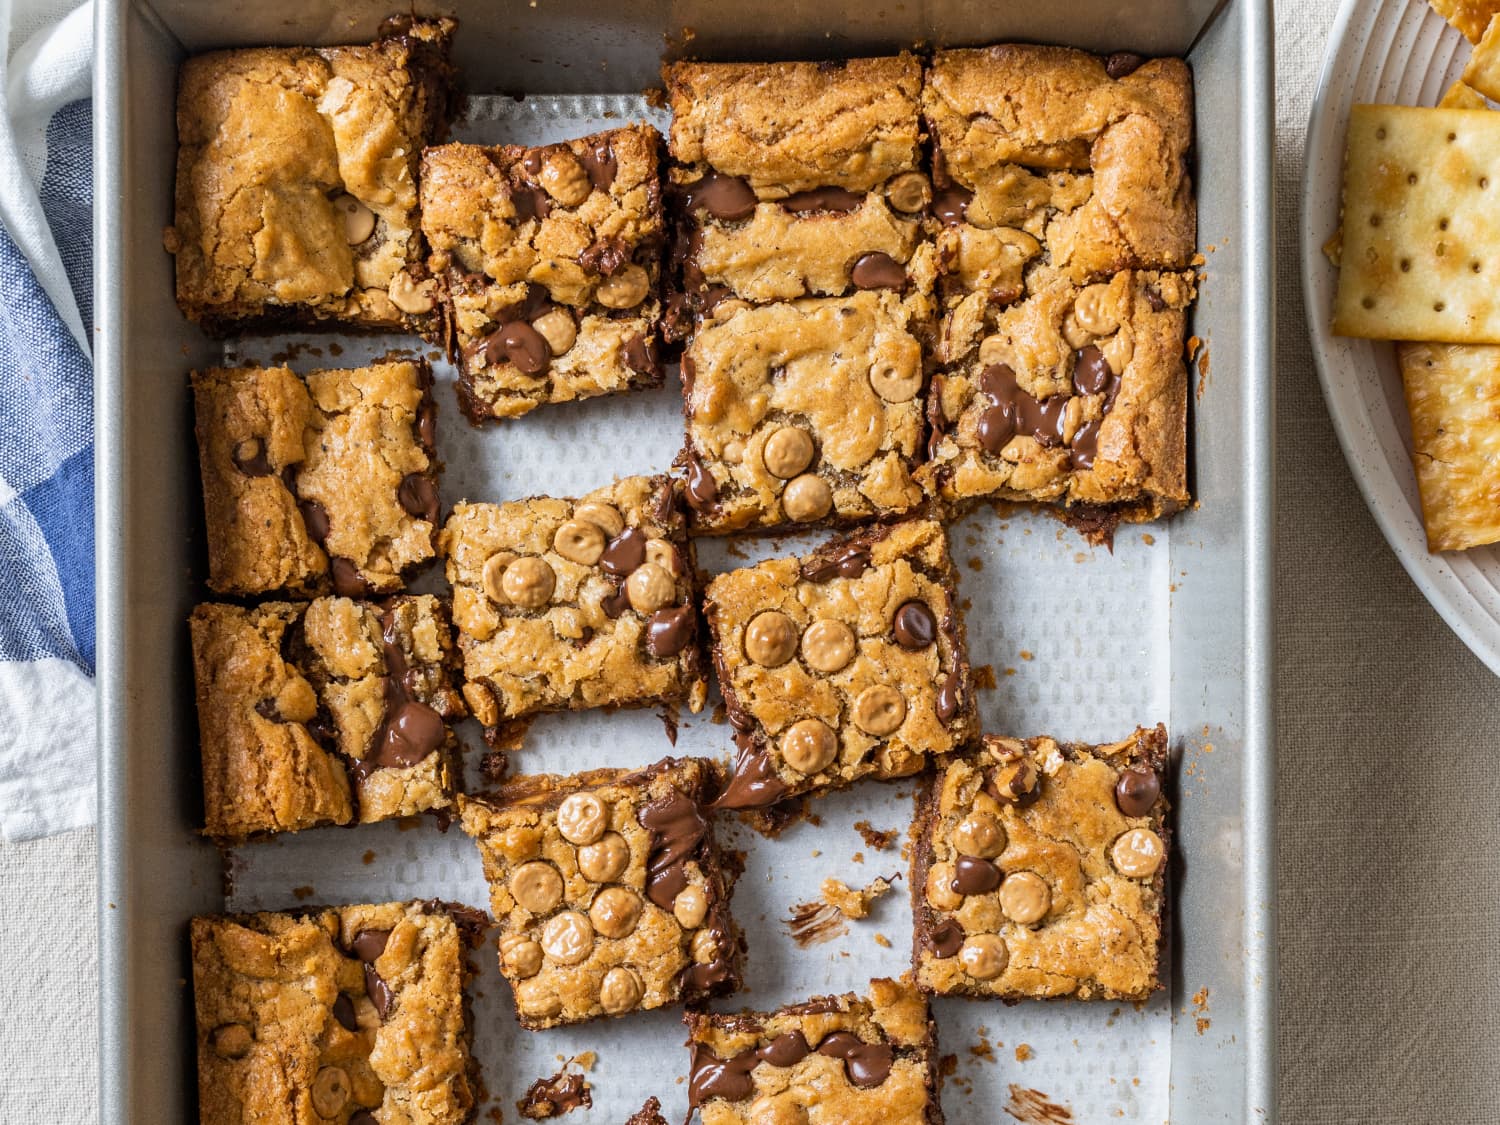 🍮 Only a Person Older Than 60 Will Have Eaten at Least 13/25 of These Forgotten Desserts Blondies